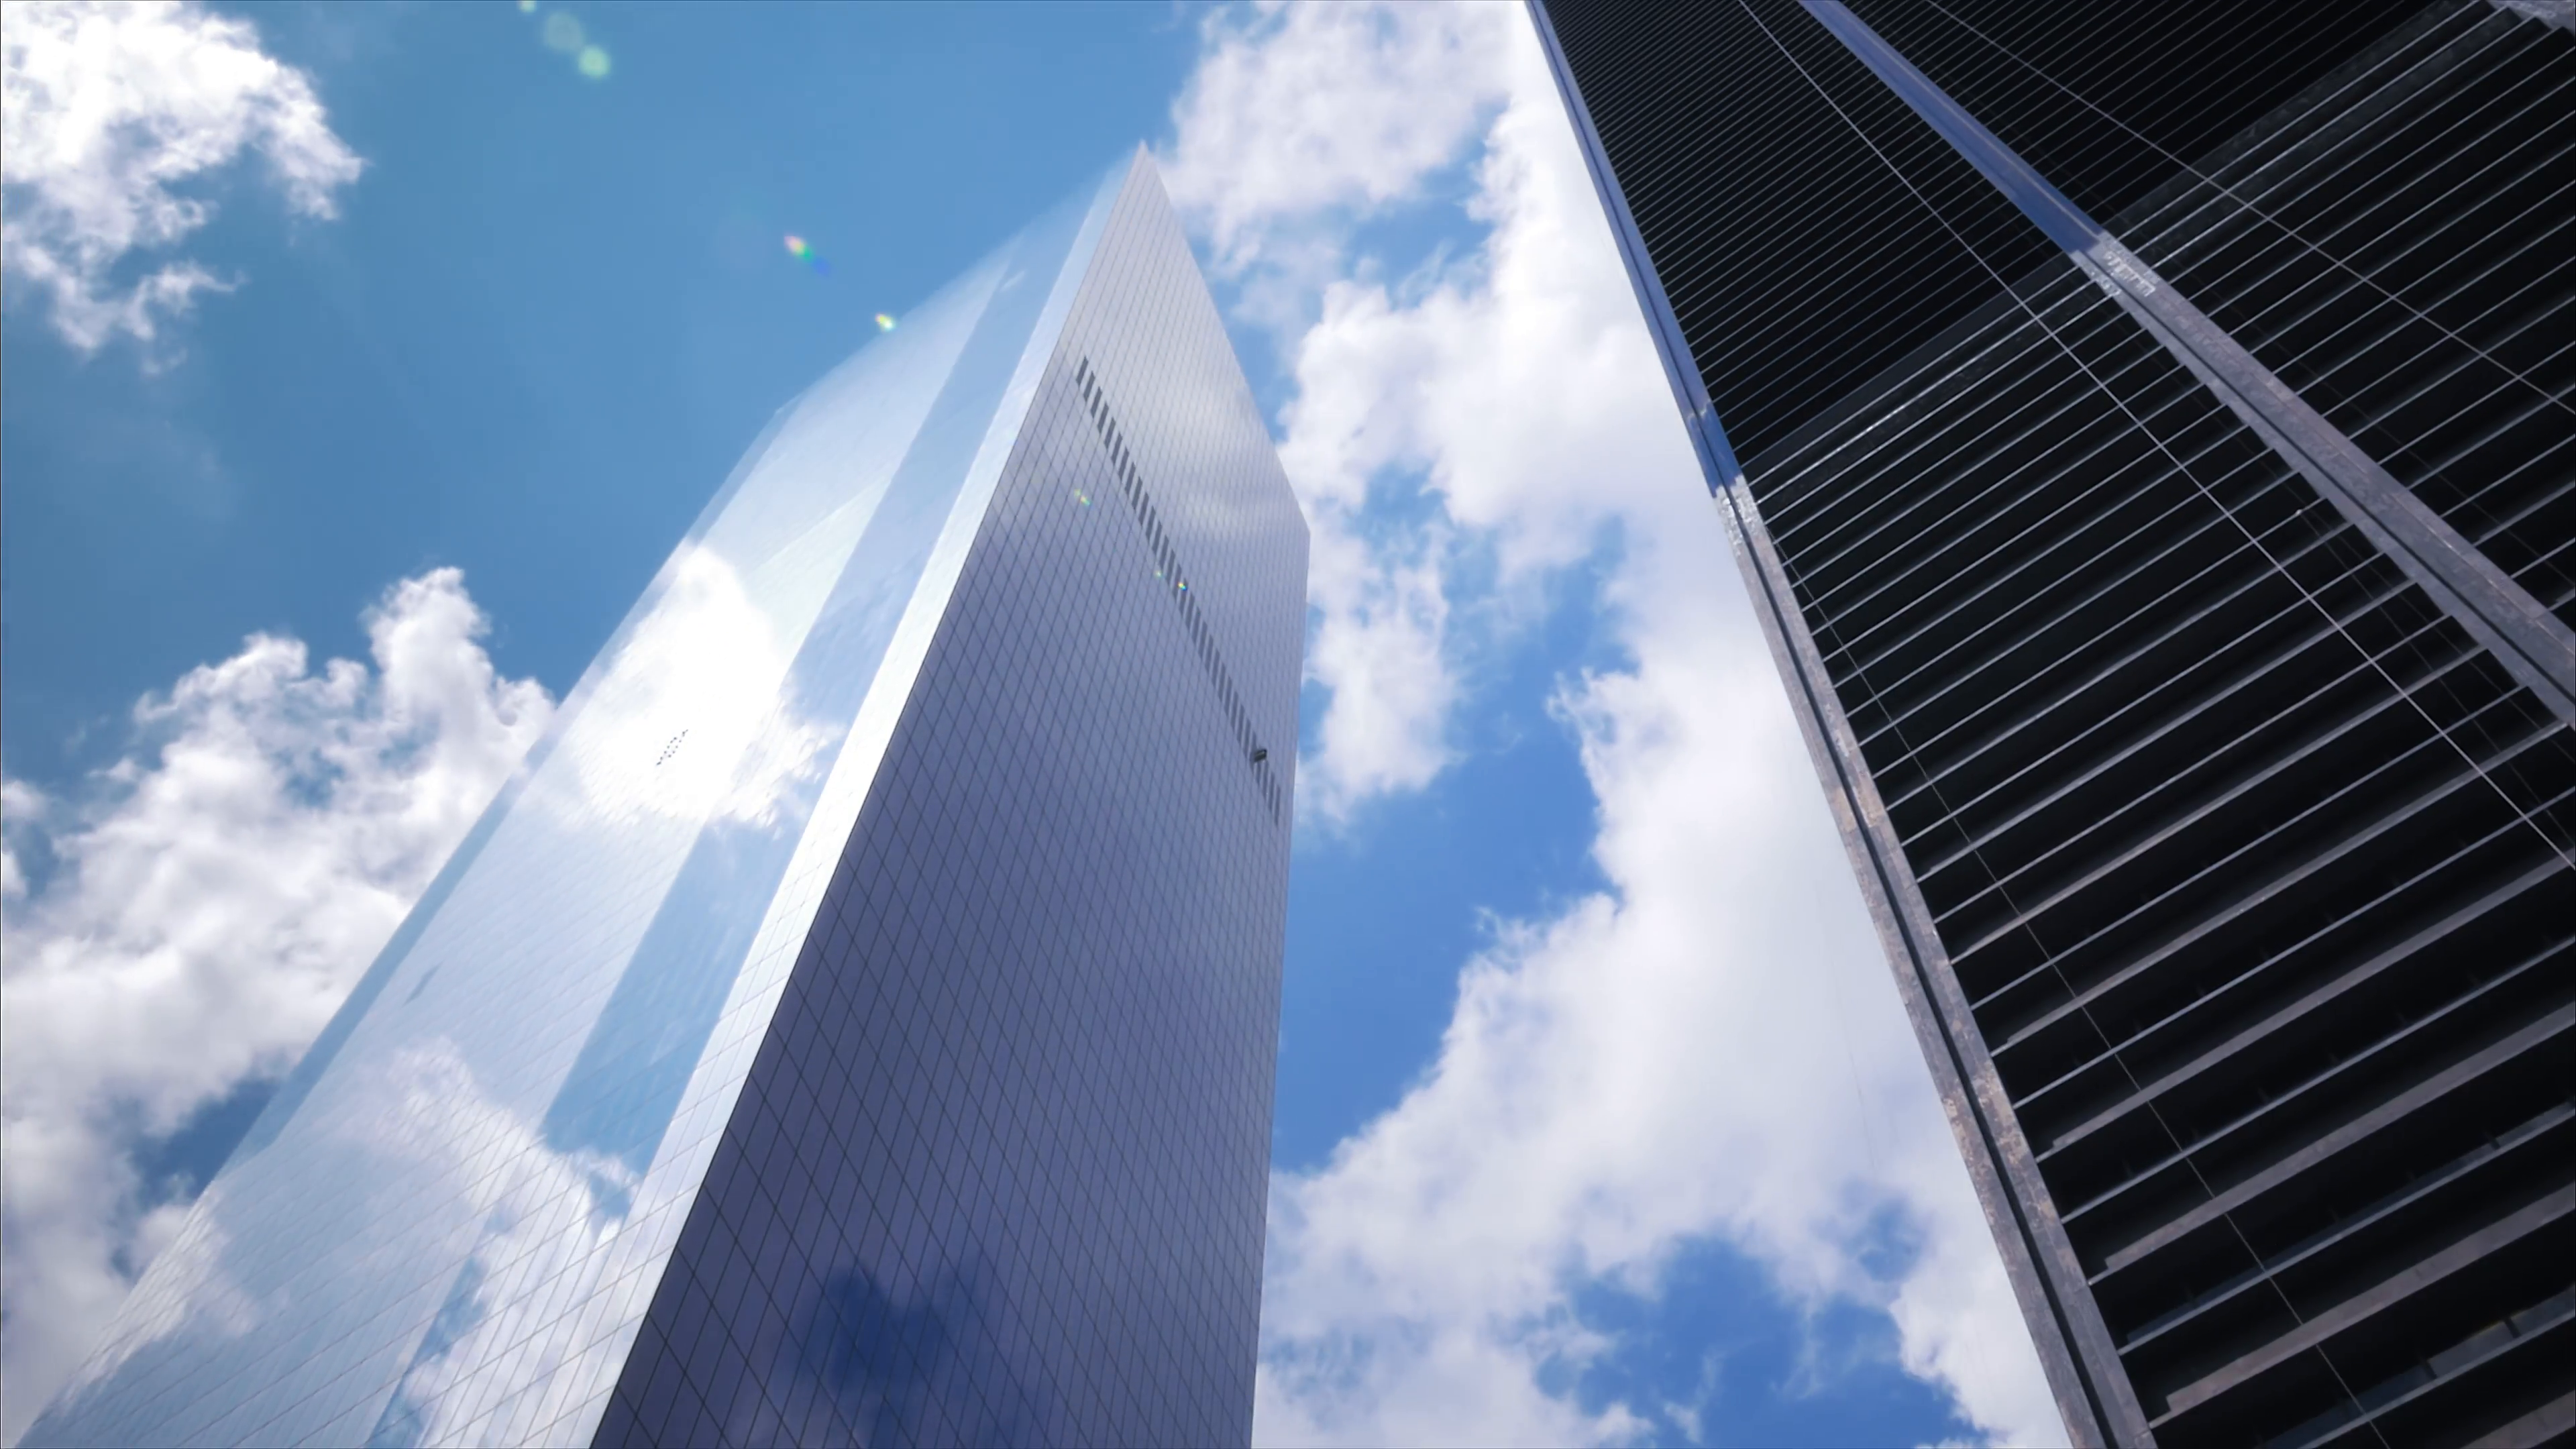 NYC skyscrapers glass mirror facade blue sky clouds reflection New ...